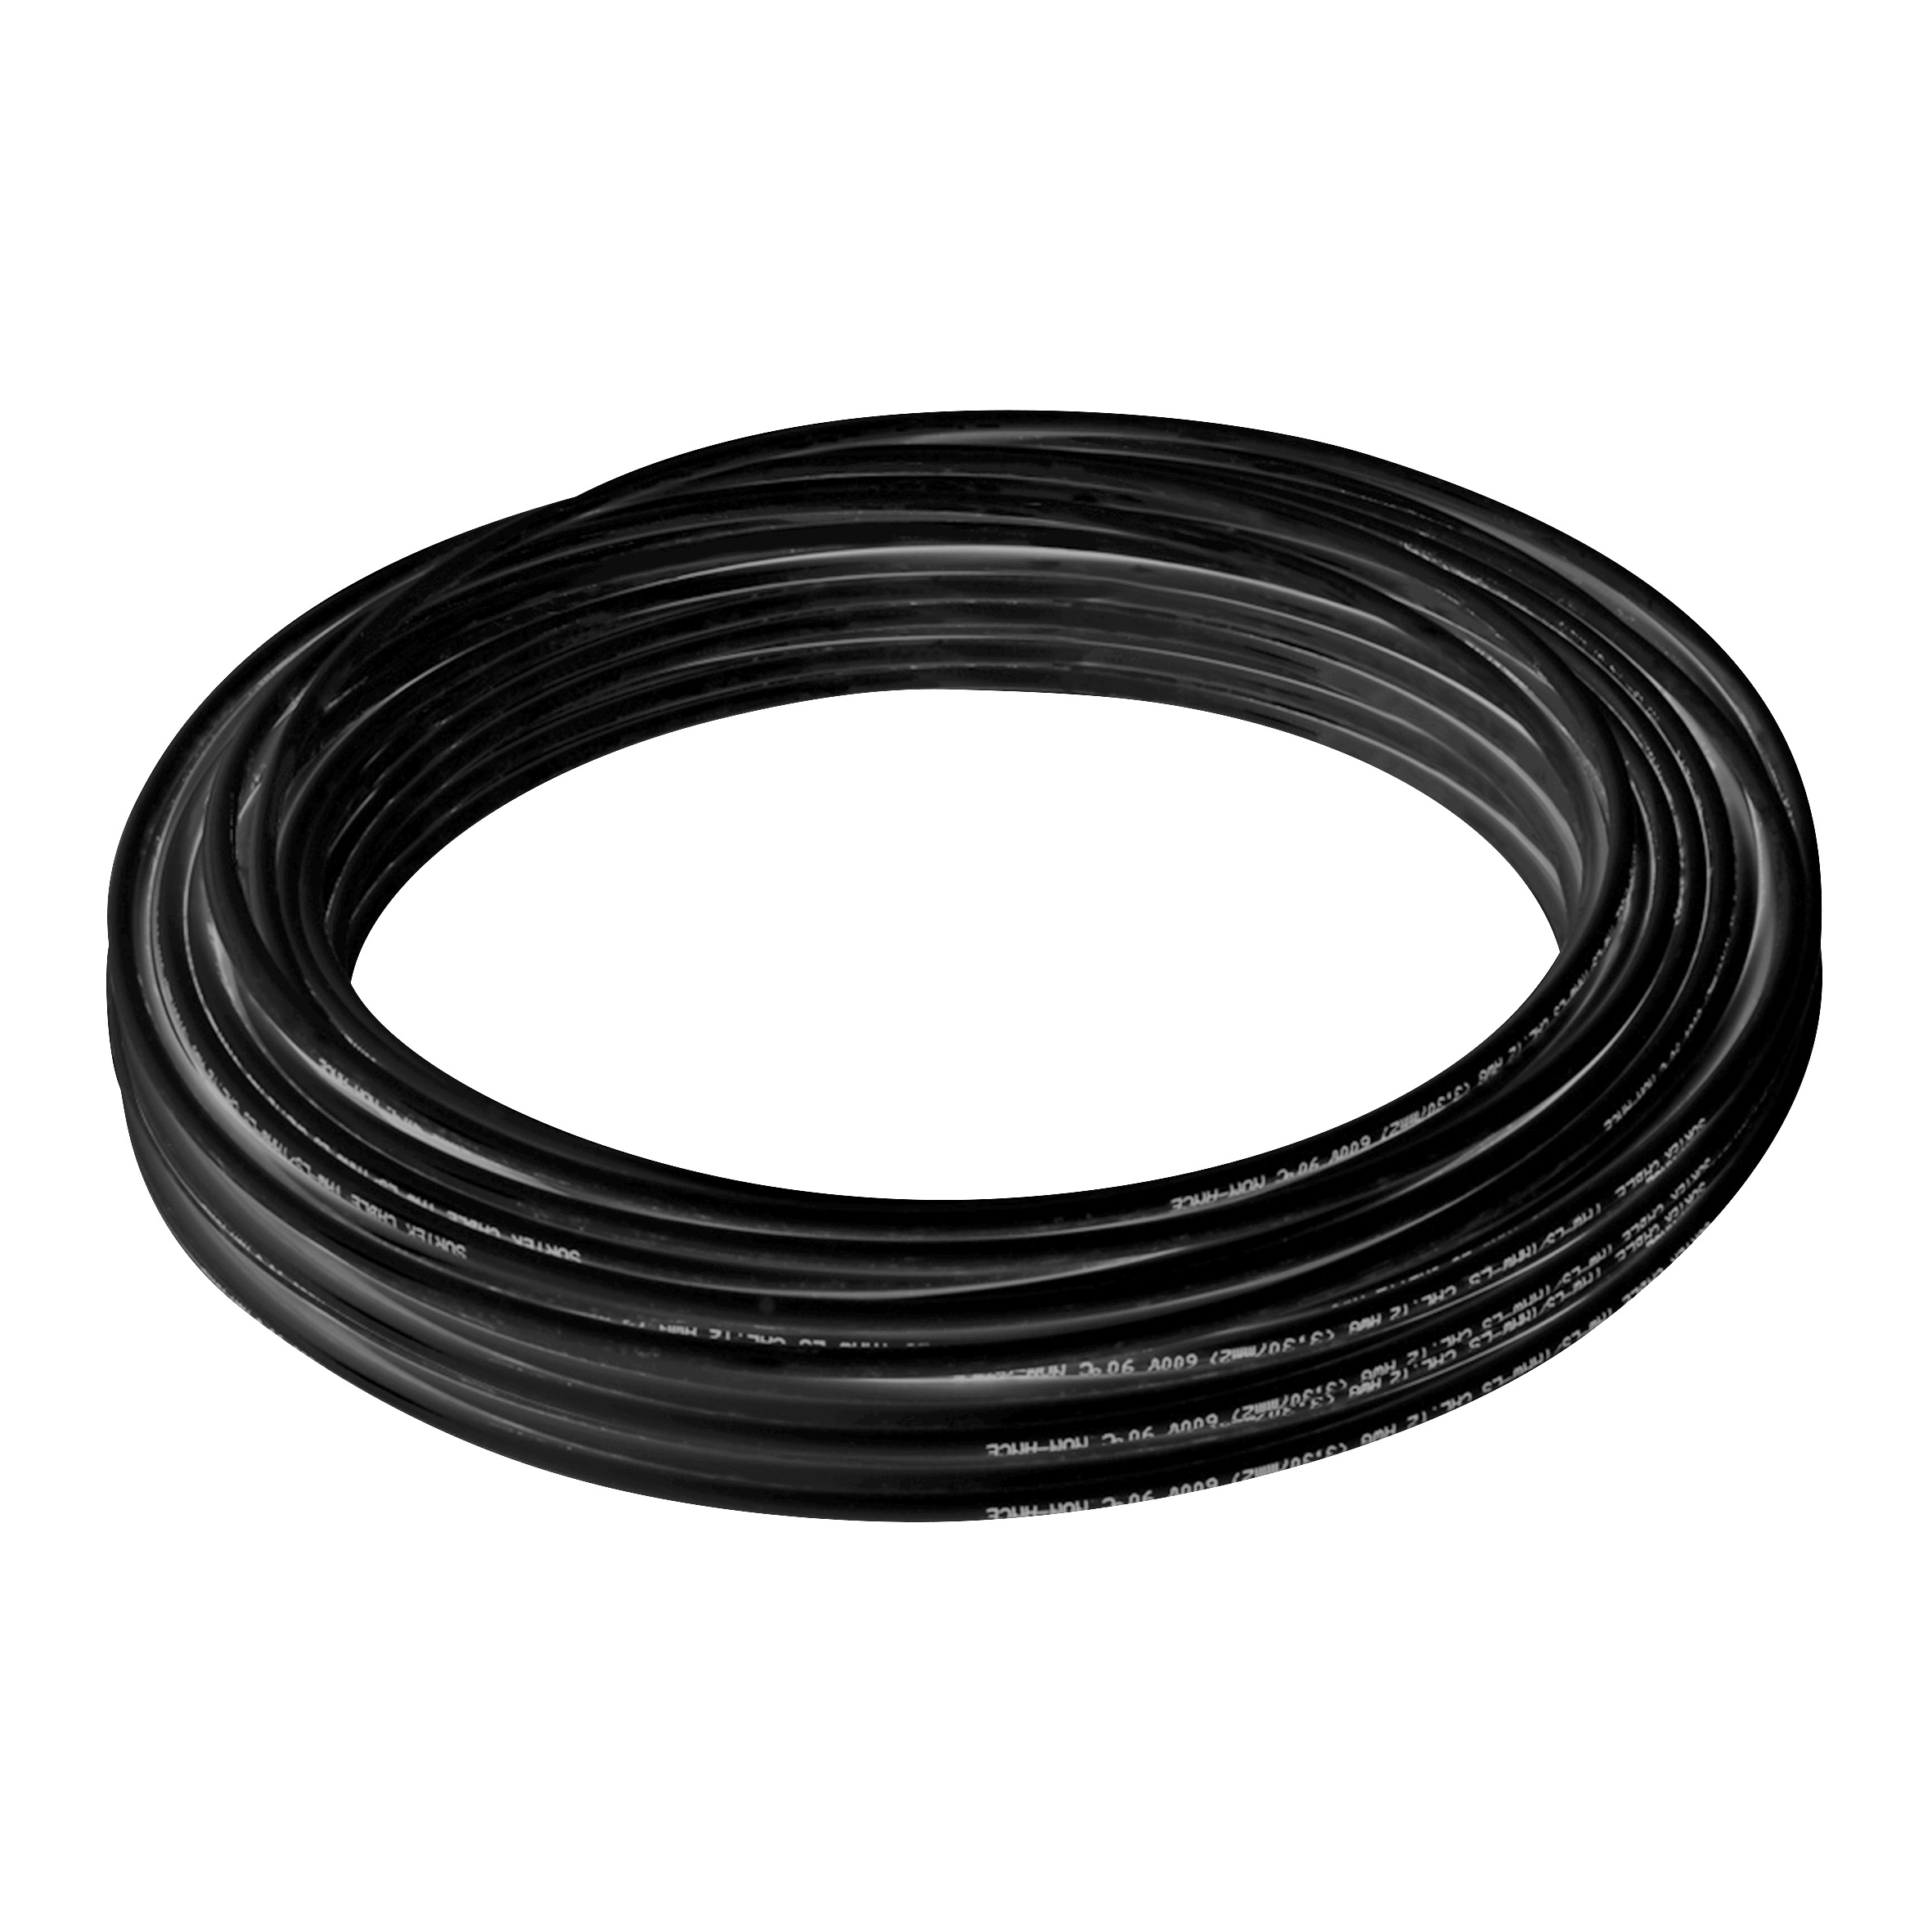 Cable eléctrico tipo THW-LS / THHW-LS Cal.10 100m negro